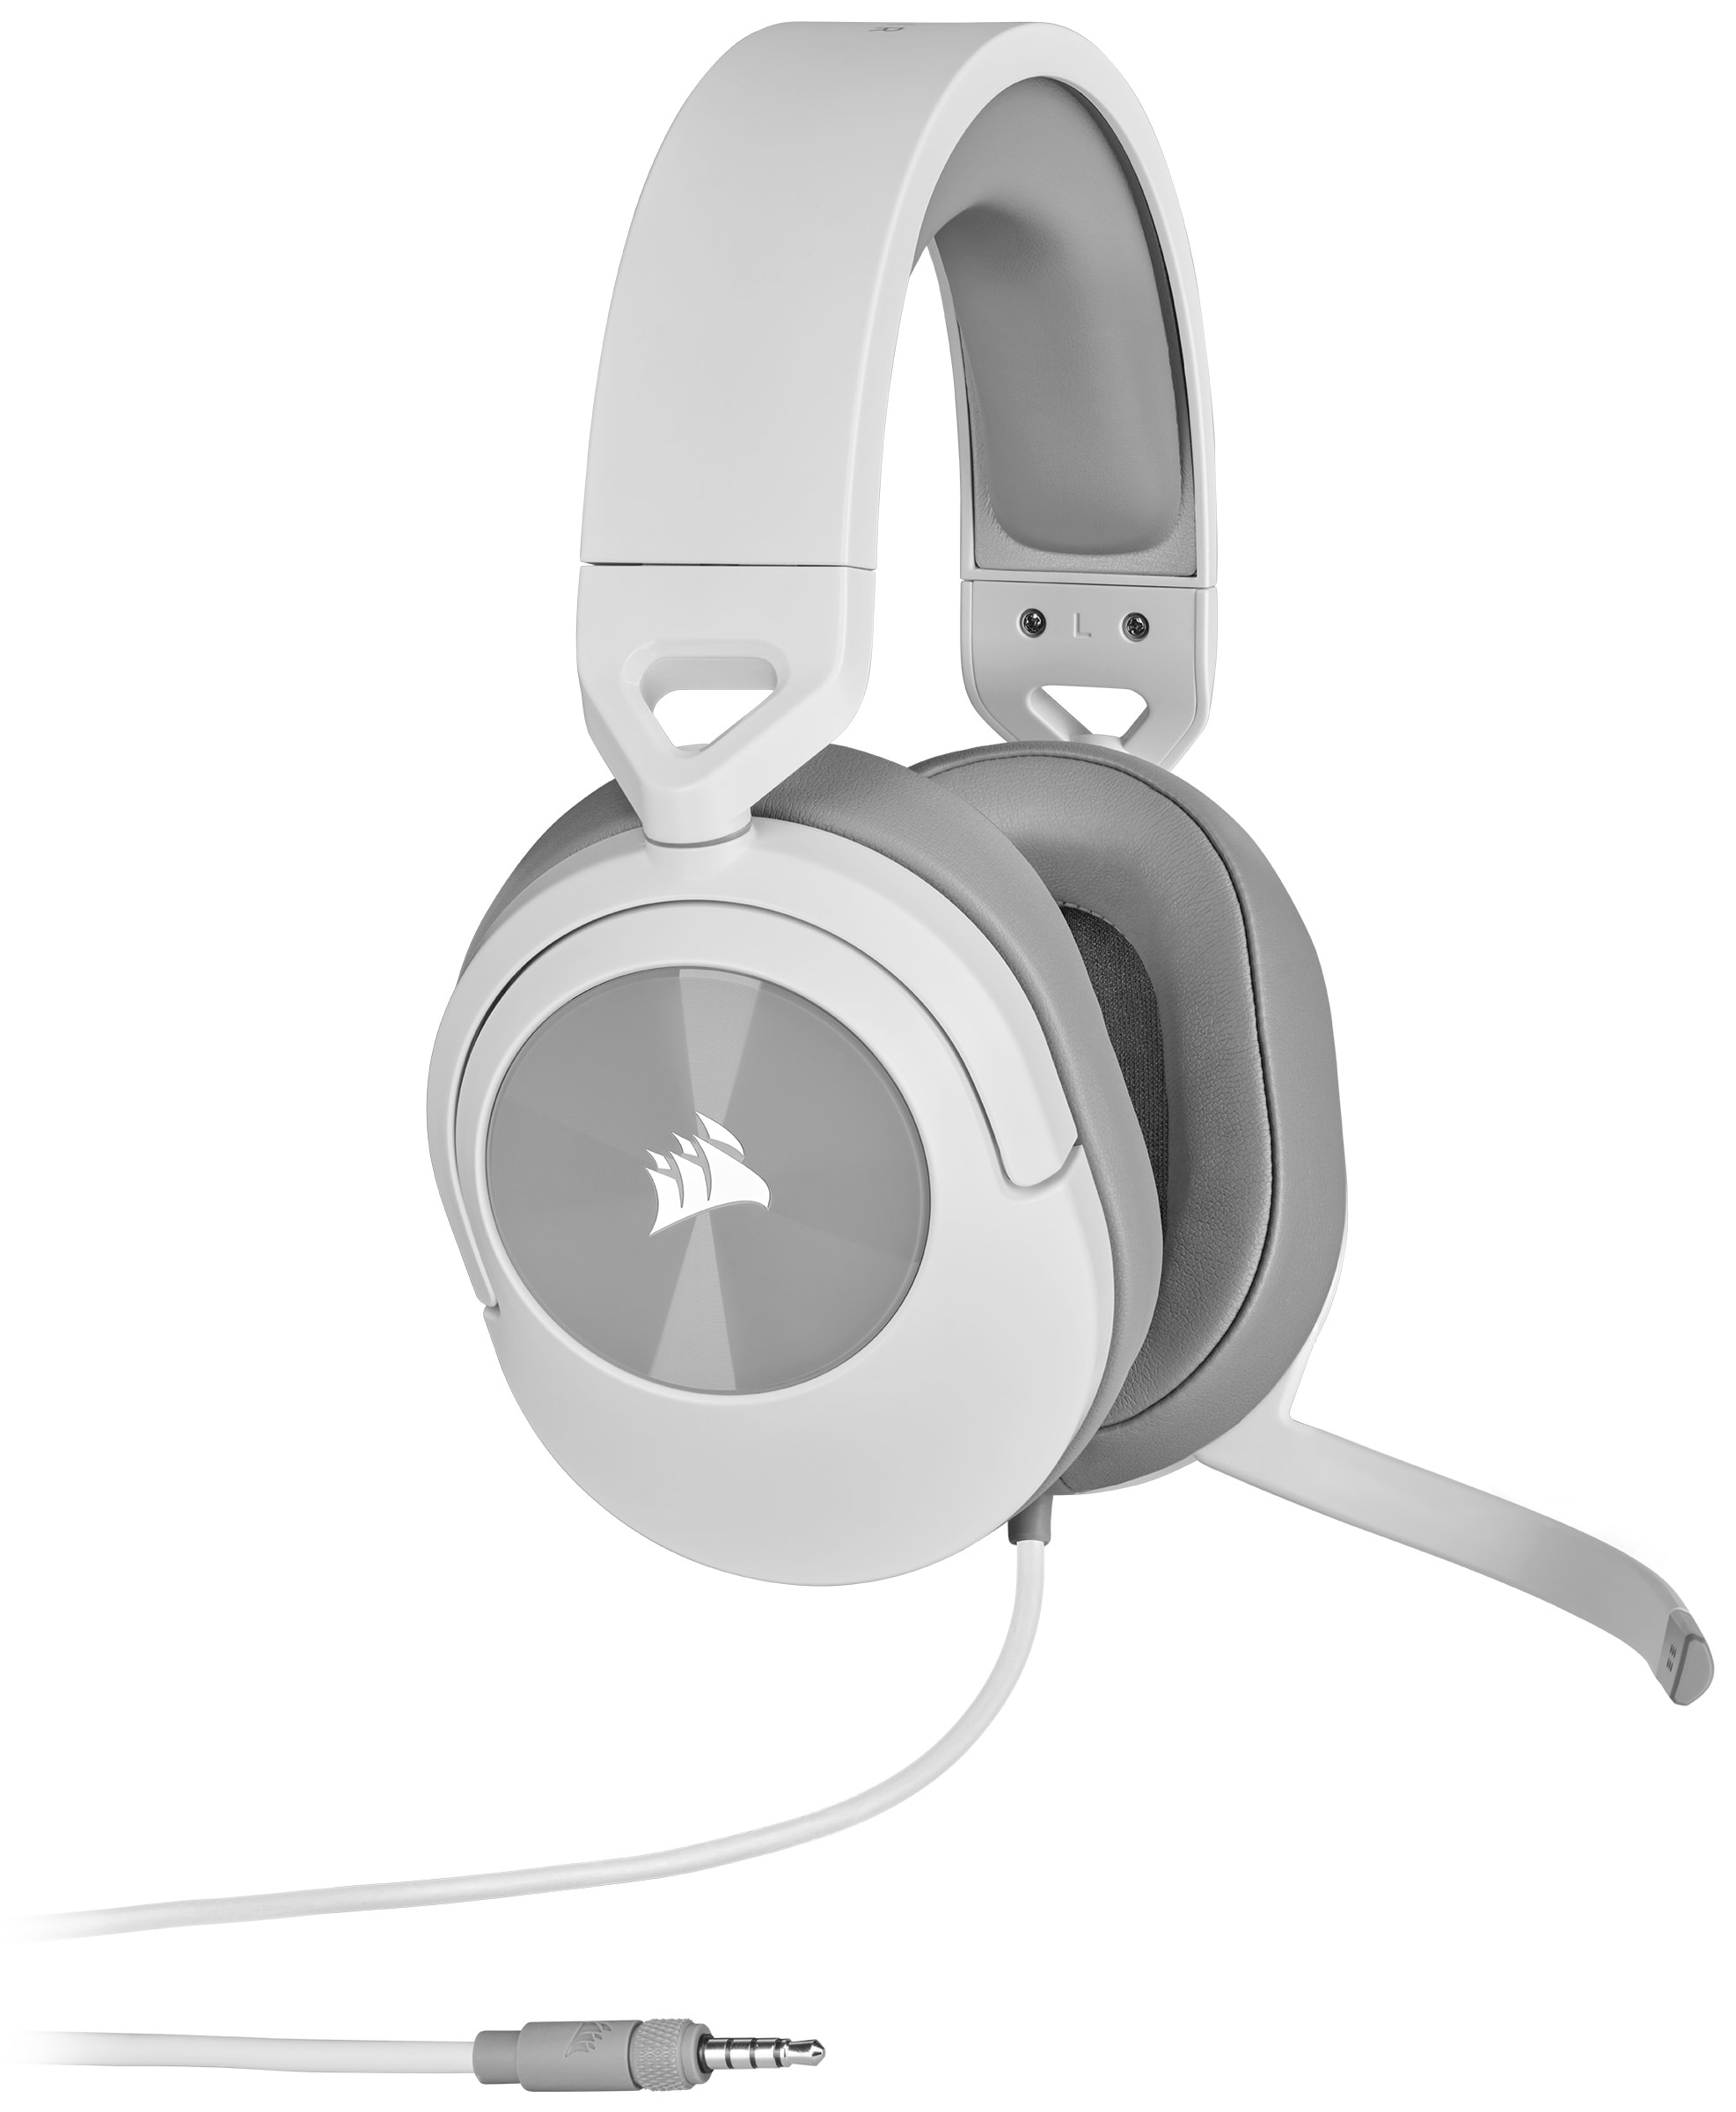 Corsair Gaming-Headset »HS55 Stereo UNIVERSAL kaufen Carbon« 